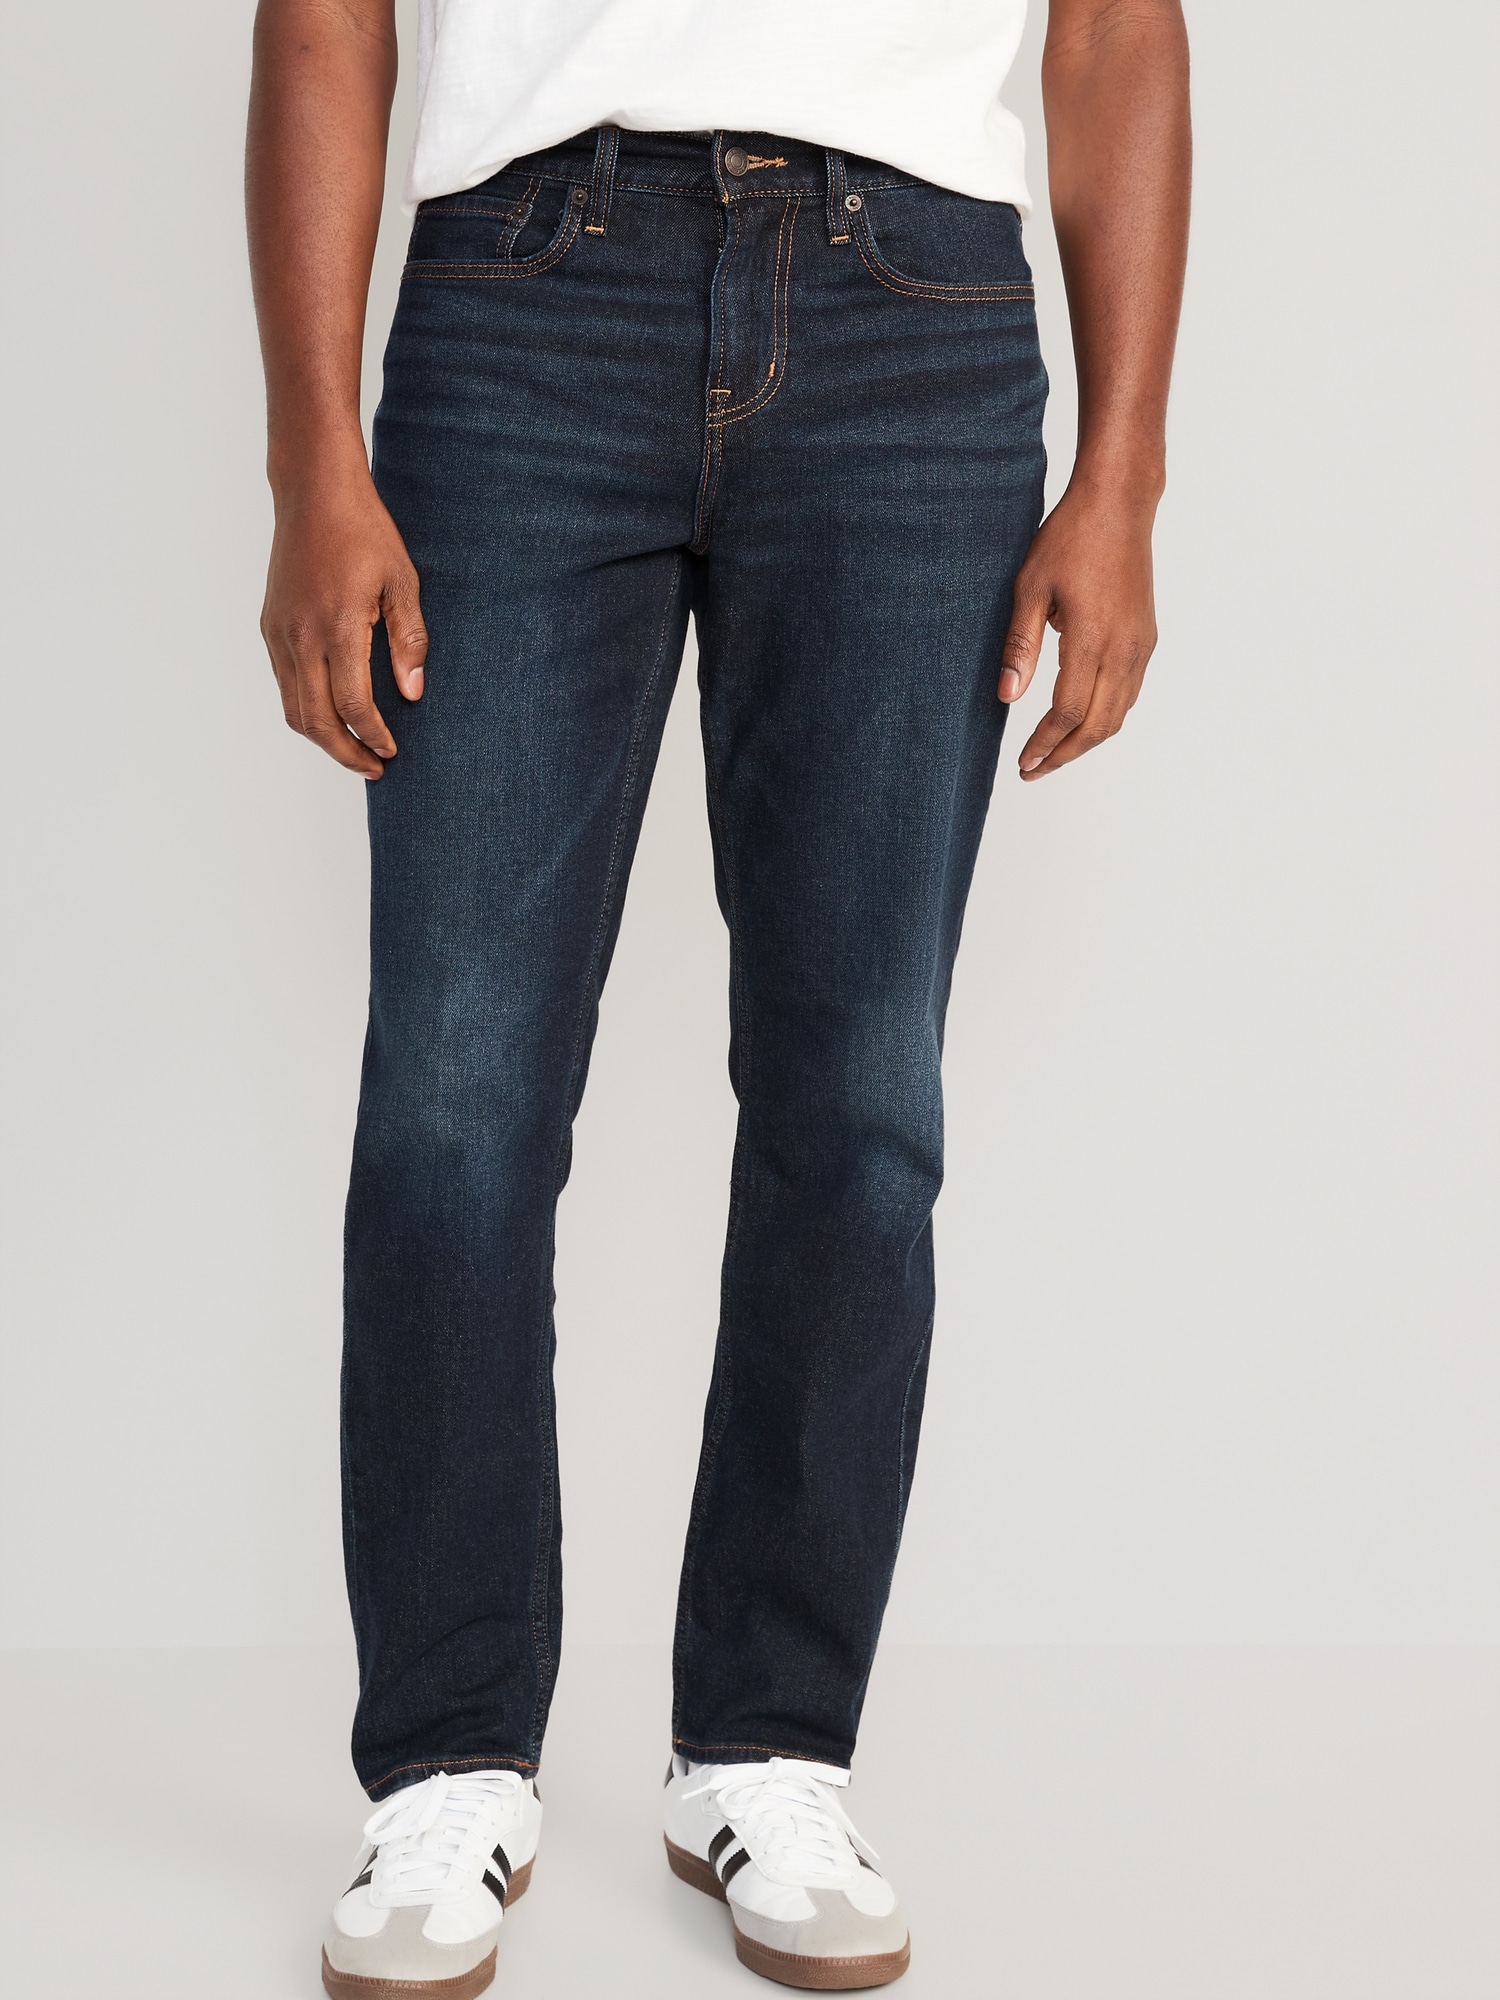 Old Navy - ➡️ Here's a denim fit guide for the gentlemen